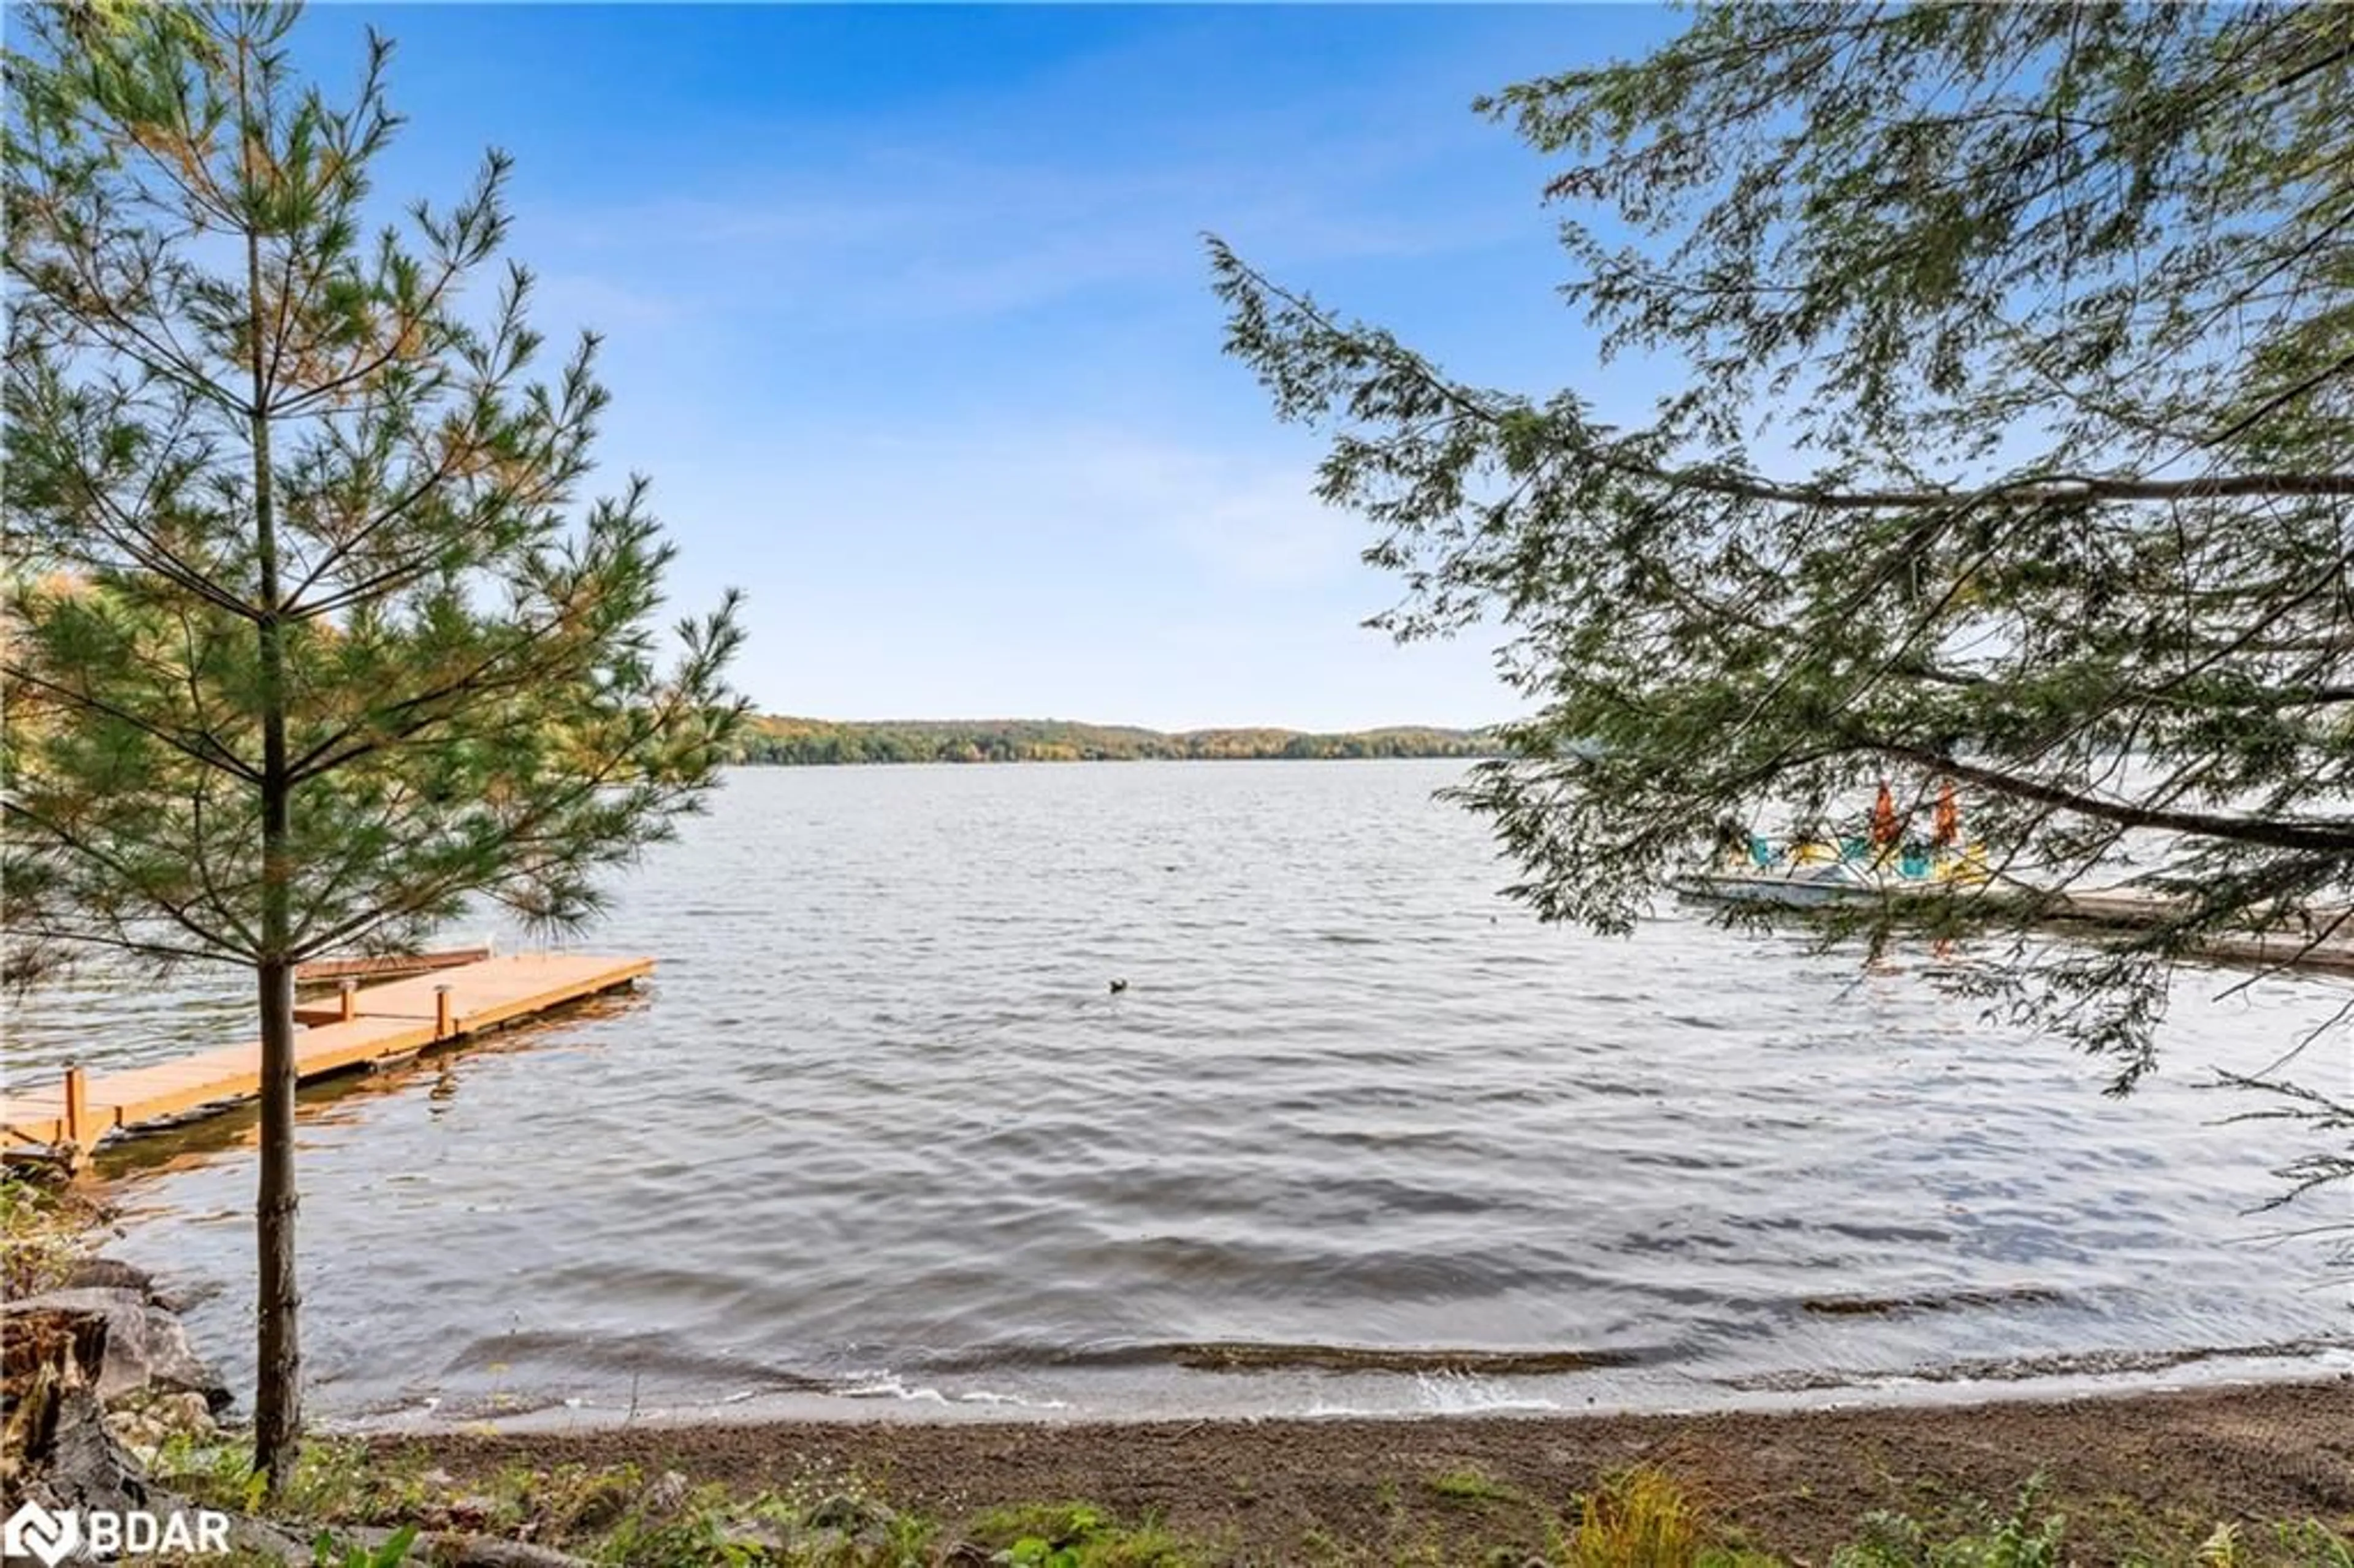 Lakeview for 1464 Northshore Rd, Utterson Ontario P0B 1M0